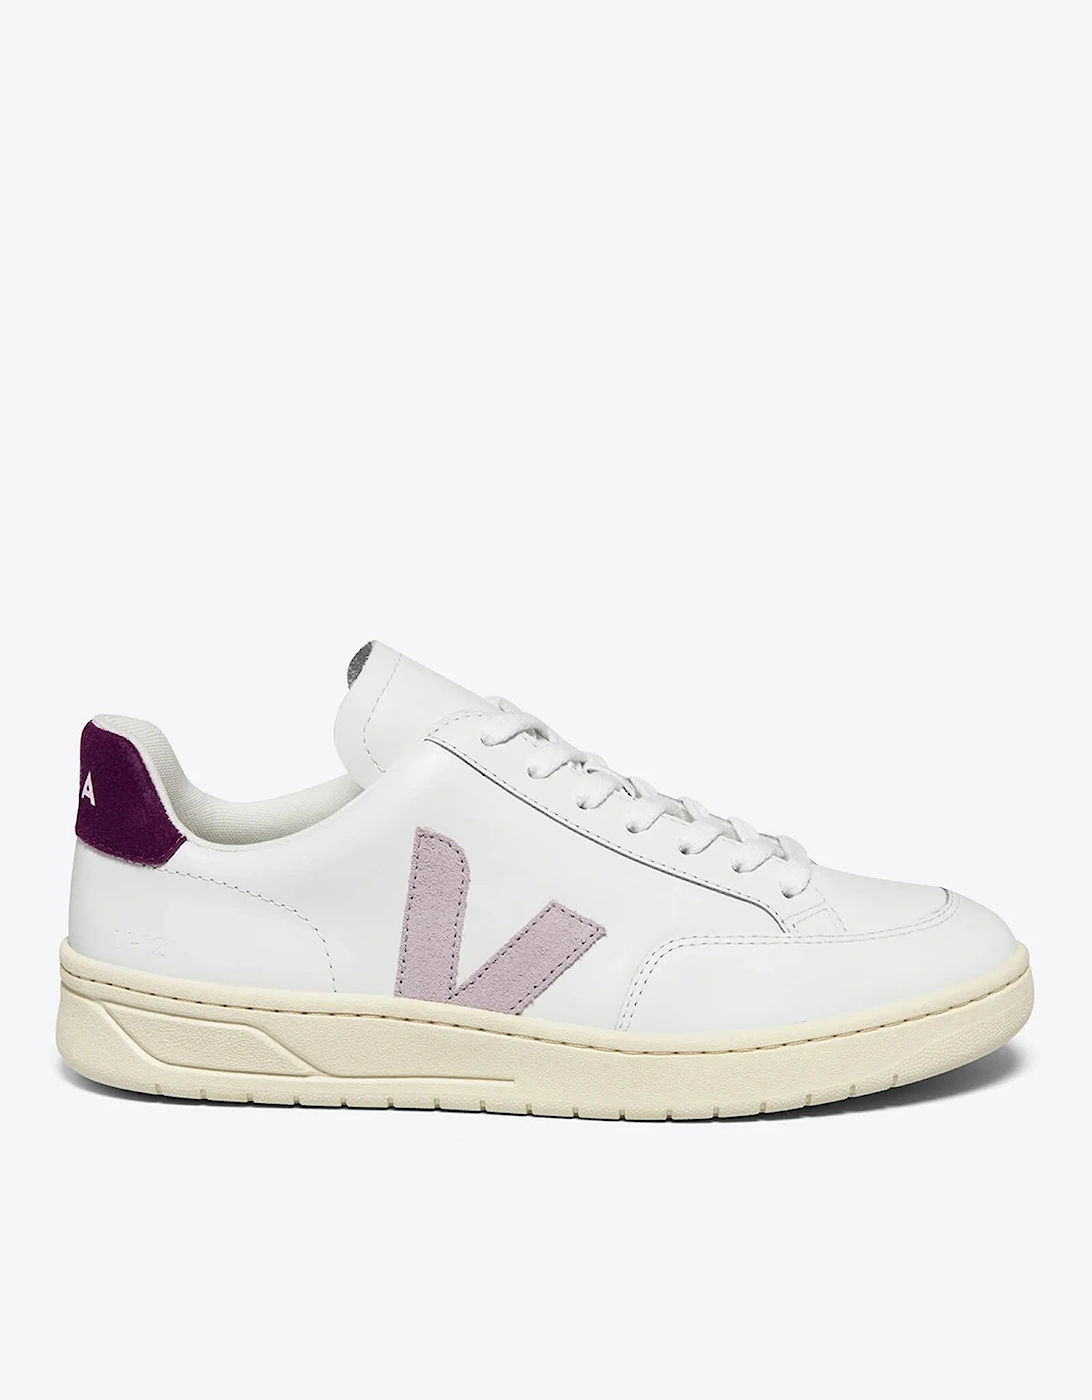 Women's V-12 Leather Trainers - - Home - Women's Shoes - Women's Trainers - Women's Low Top Trainers - Women's V-12 Leather Trainers, 2 of 1